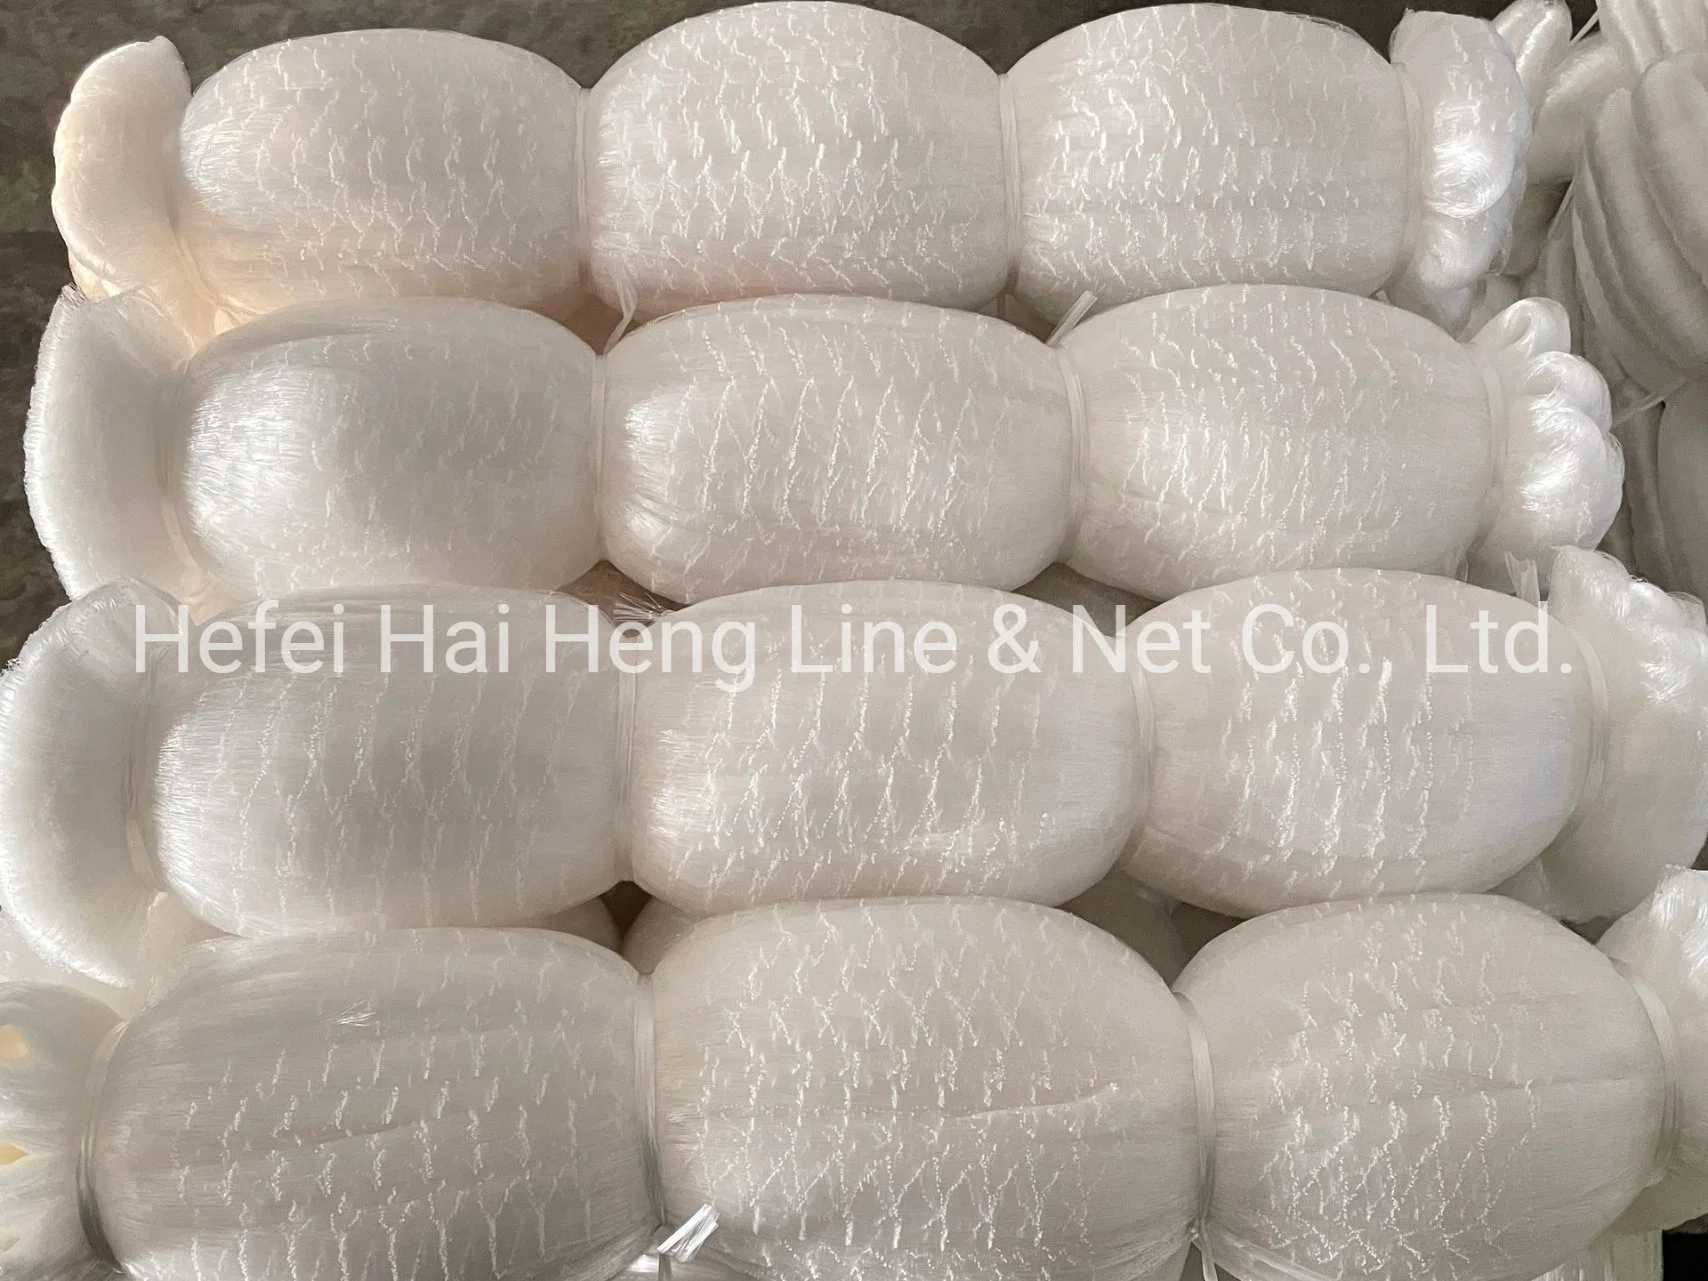 for Argentine Market Nylon Fishing Net Monofilament 0.10mm-0.90mm Multifilament 210d/2ply-48ply Twisting Net 0.20mm X 4ply-36ply